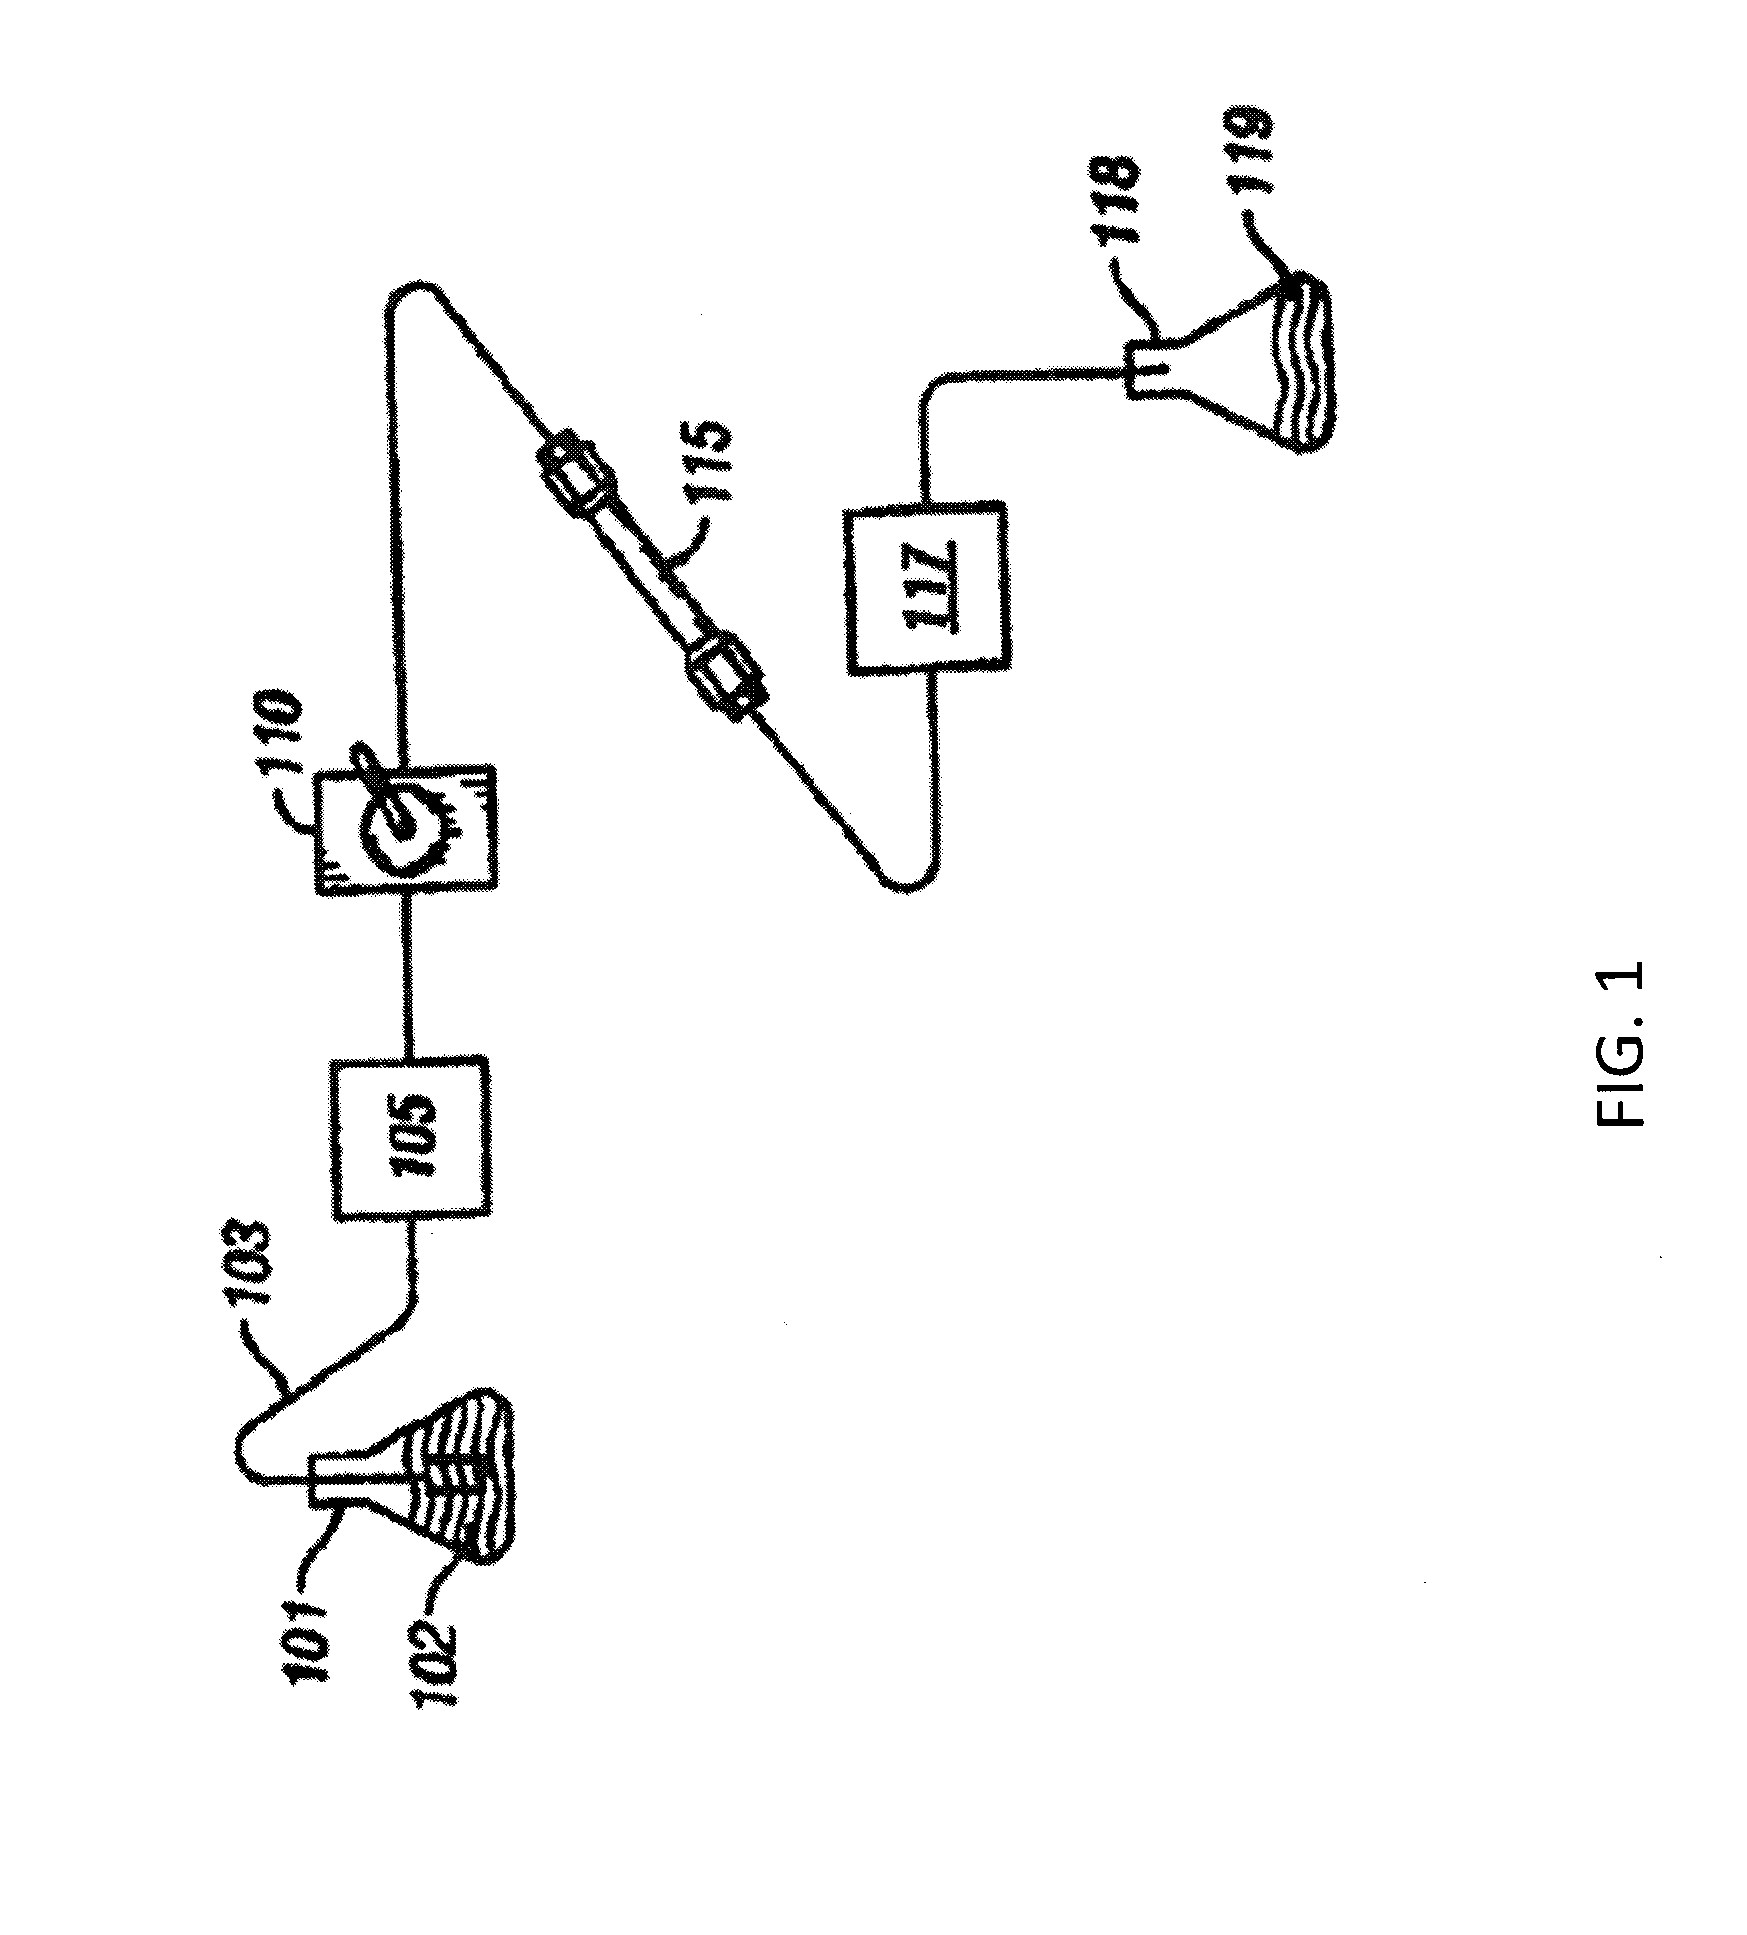 Connector with structural reinforcement and biocapatible fluid passageway